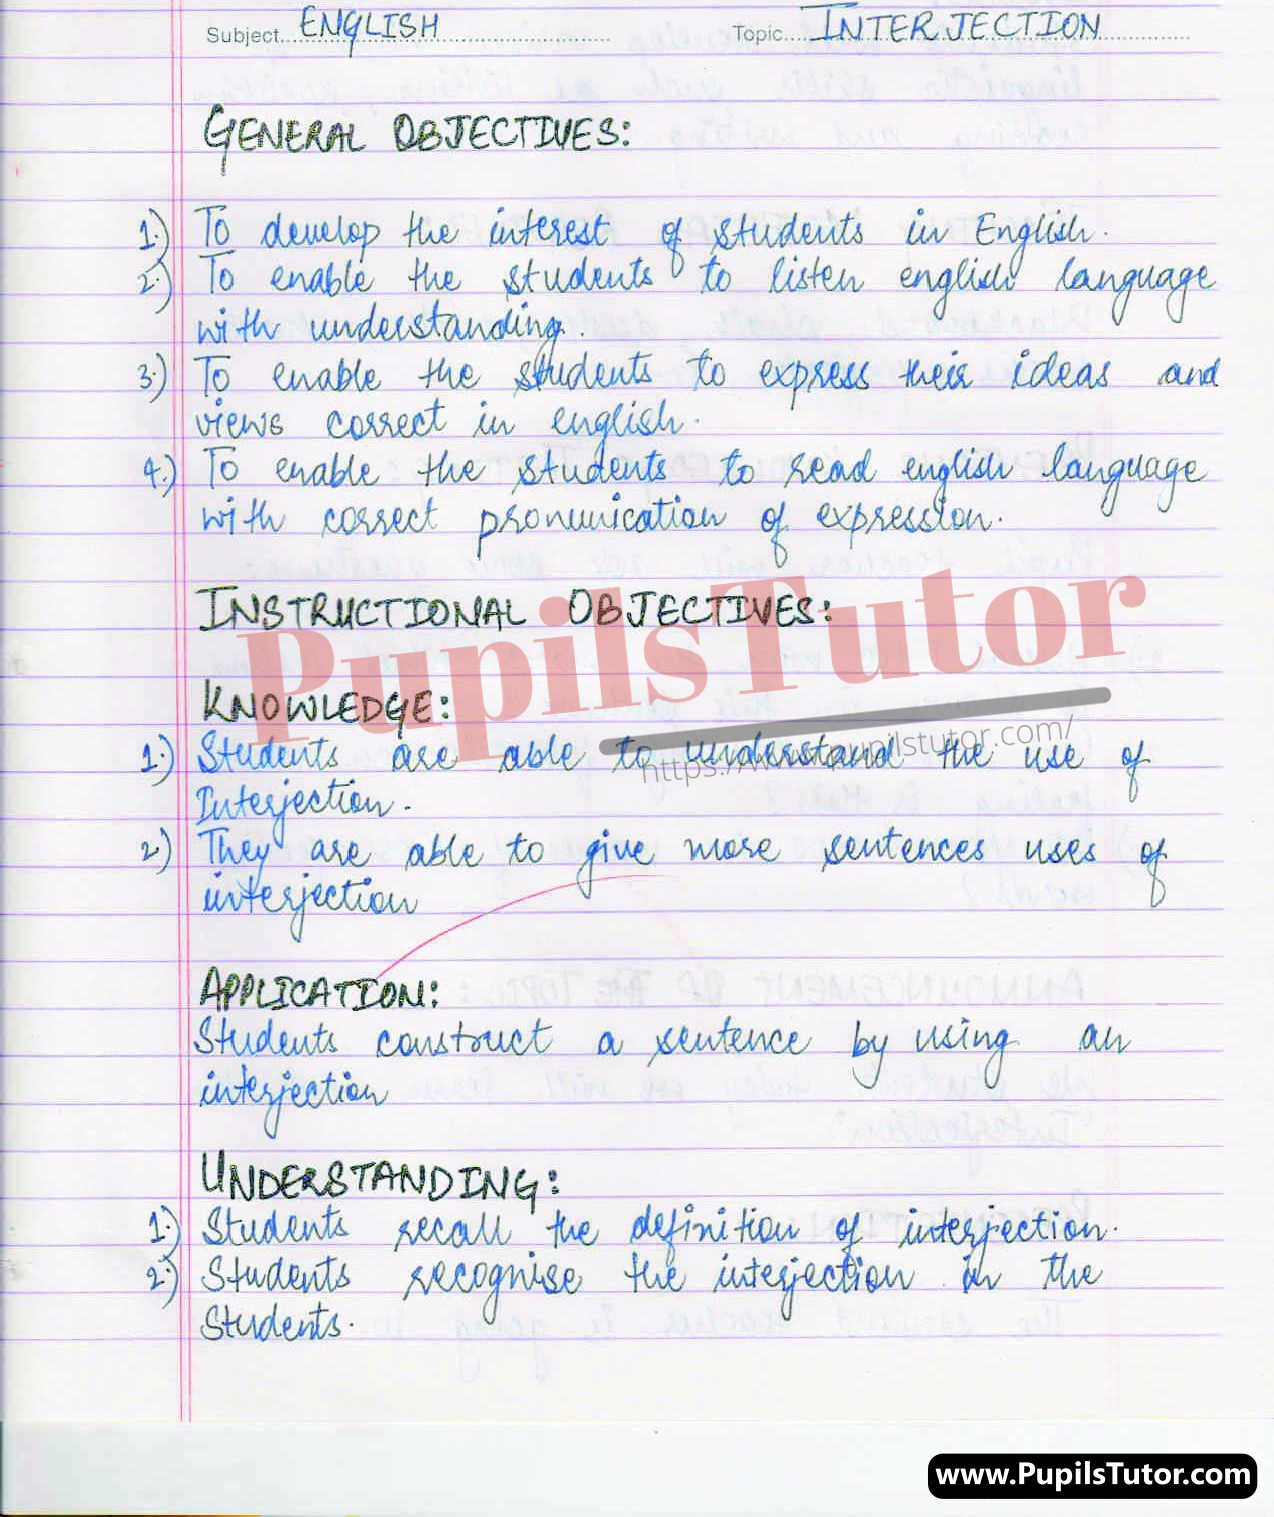 Interjection Lesson Plan – (Page And Image Number 1) – Pupils Tutor